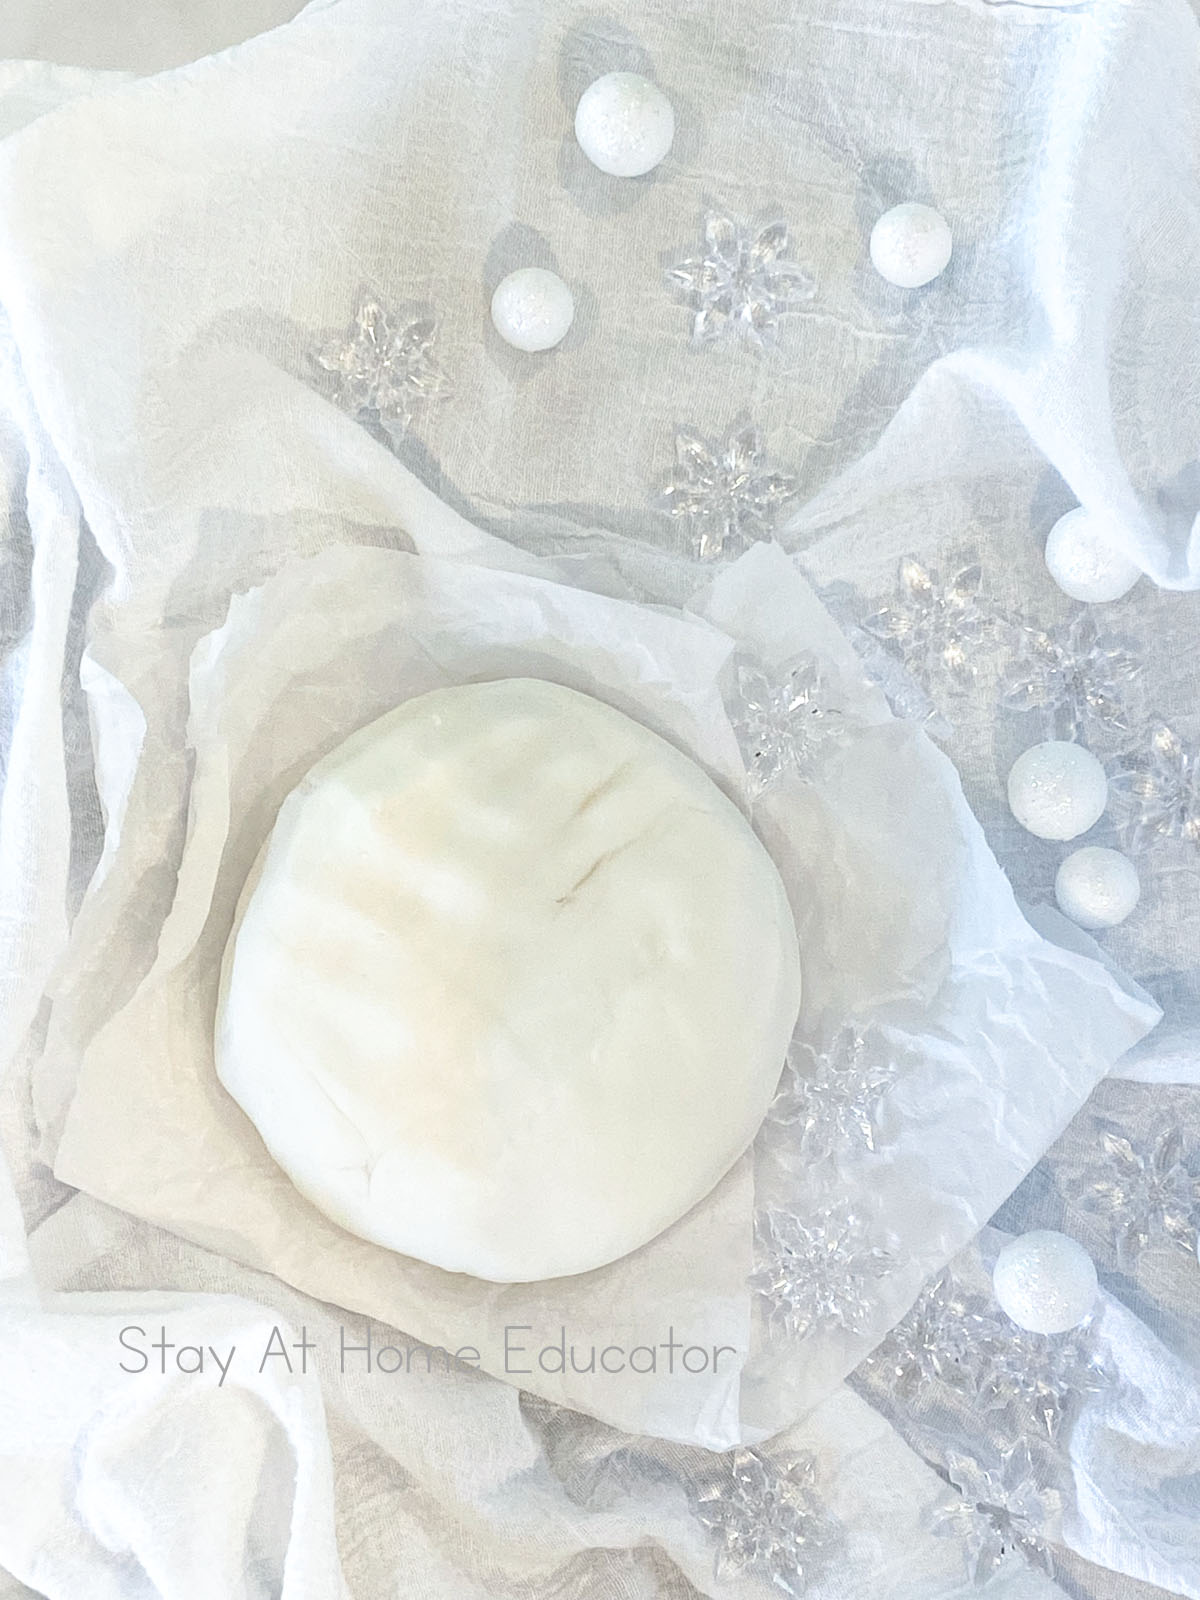 how to make white playdough | white playdough recipe without cream of tartar | ball of white playdough on parchment paper | winter playdough recipe with snowflakes and foam balls